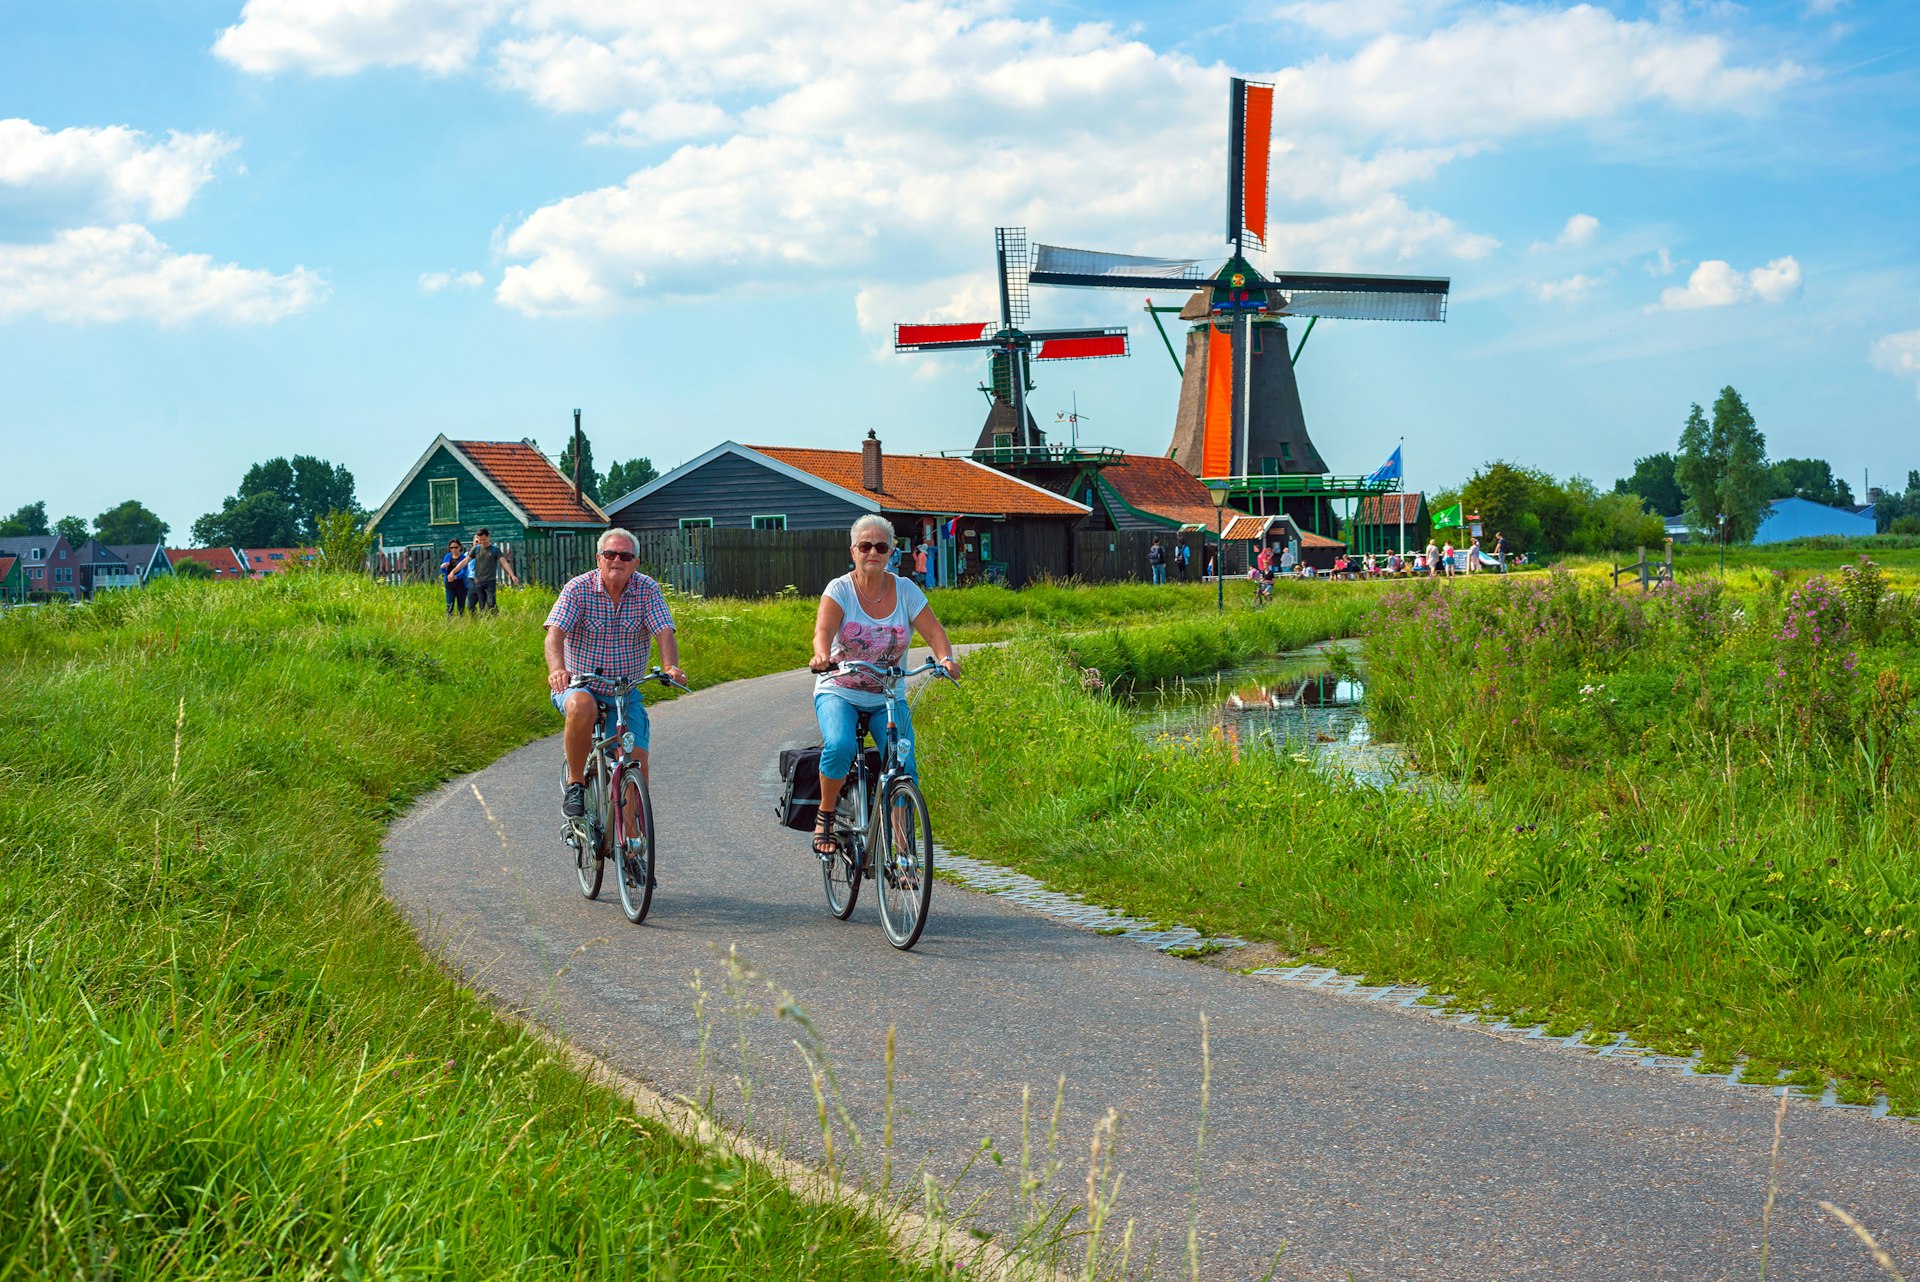 Two cyclists ride bikes on a path surrounded by grassland. There are windmills in the background